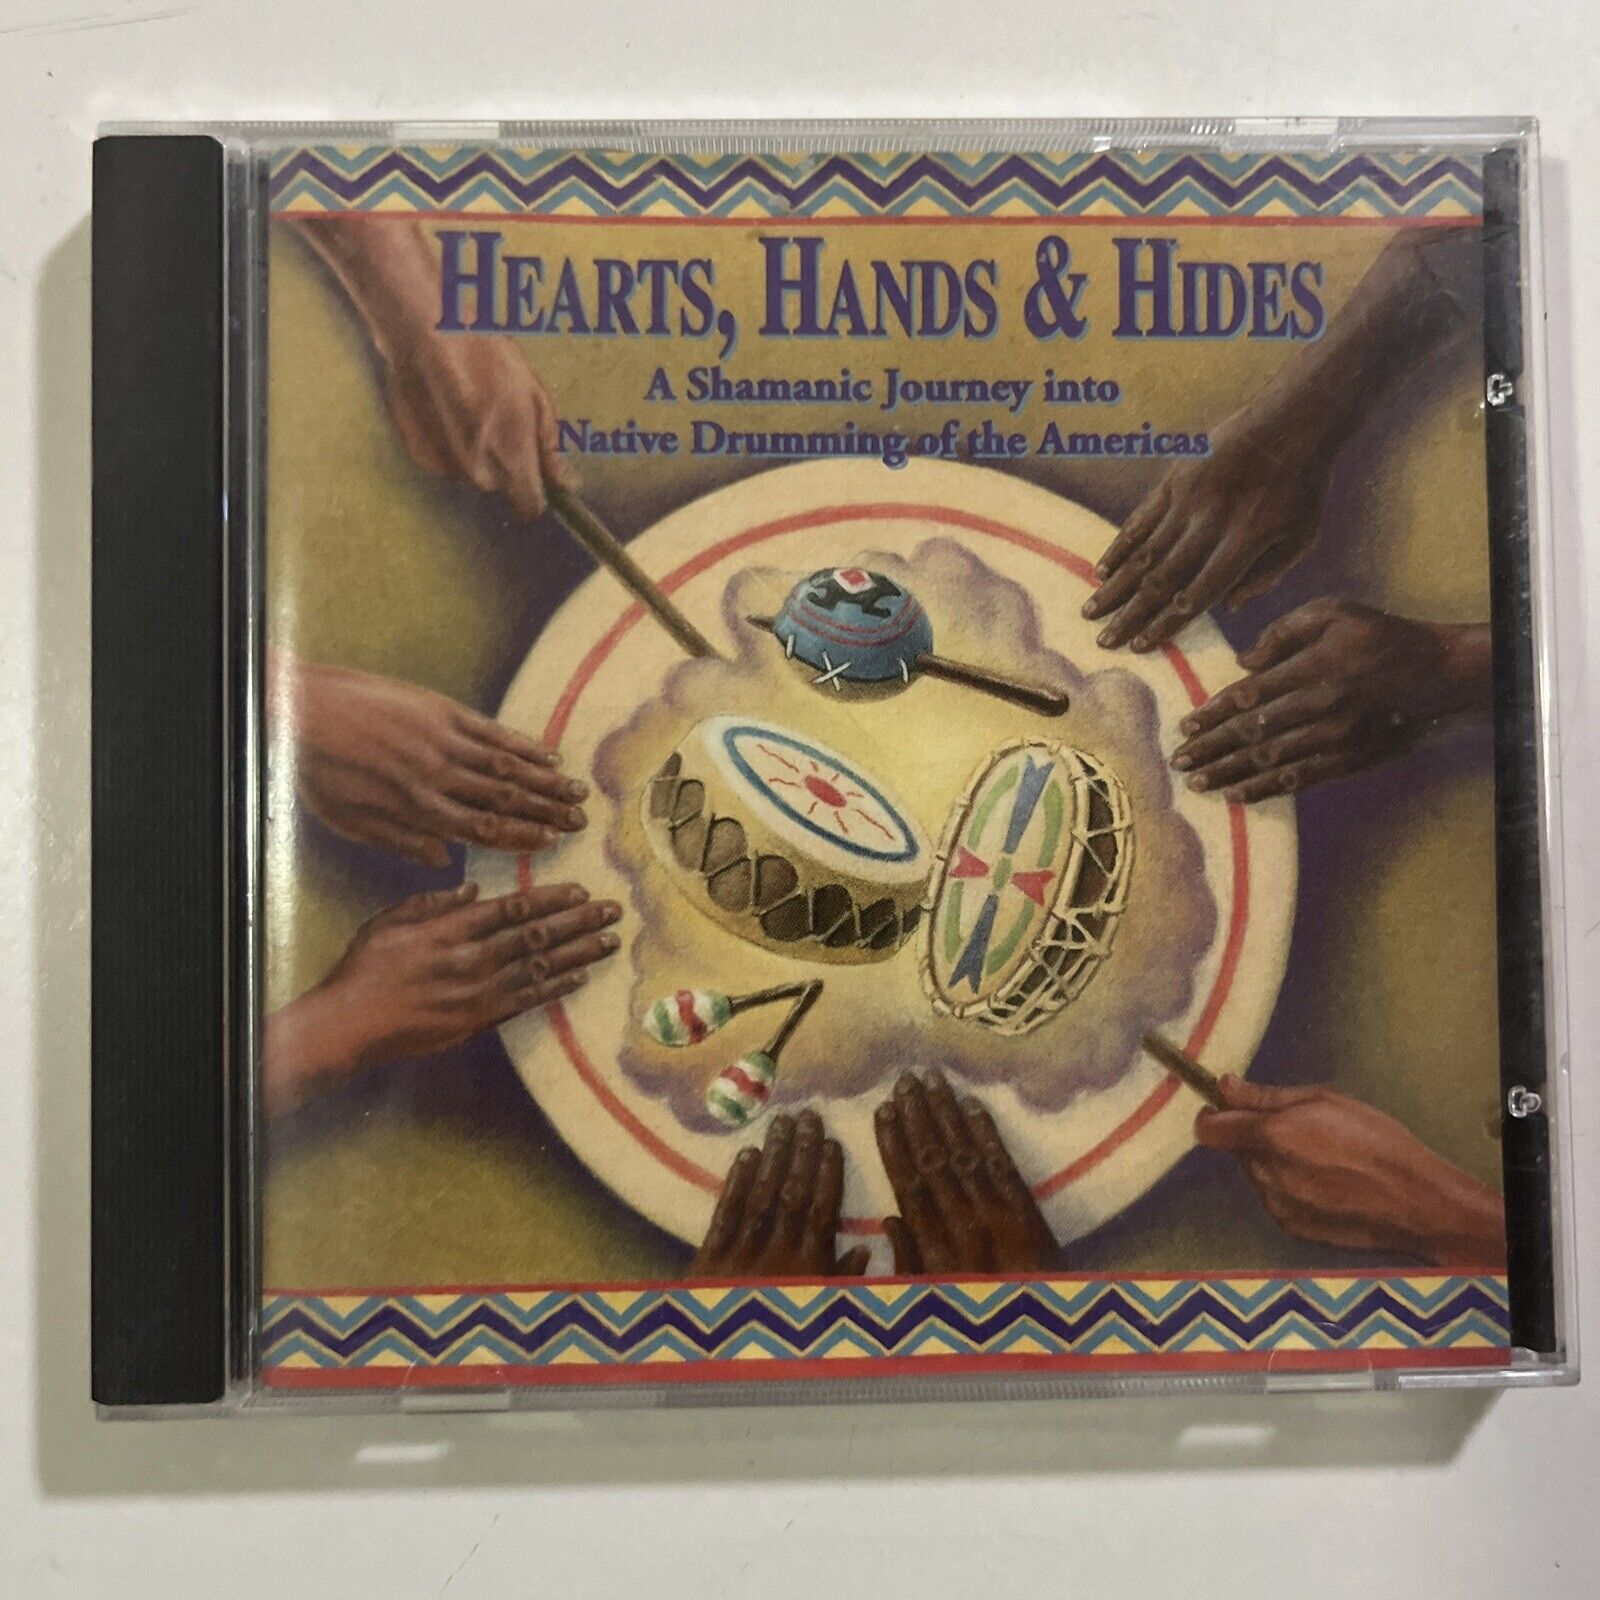 Hearts, Hands & Hides CD Shamanic Journey into Native Drumming Americas